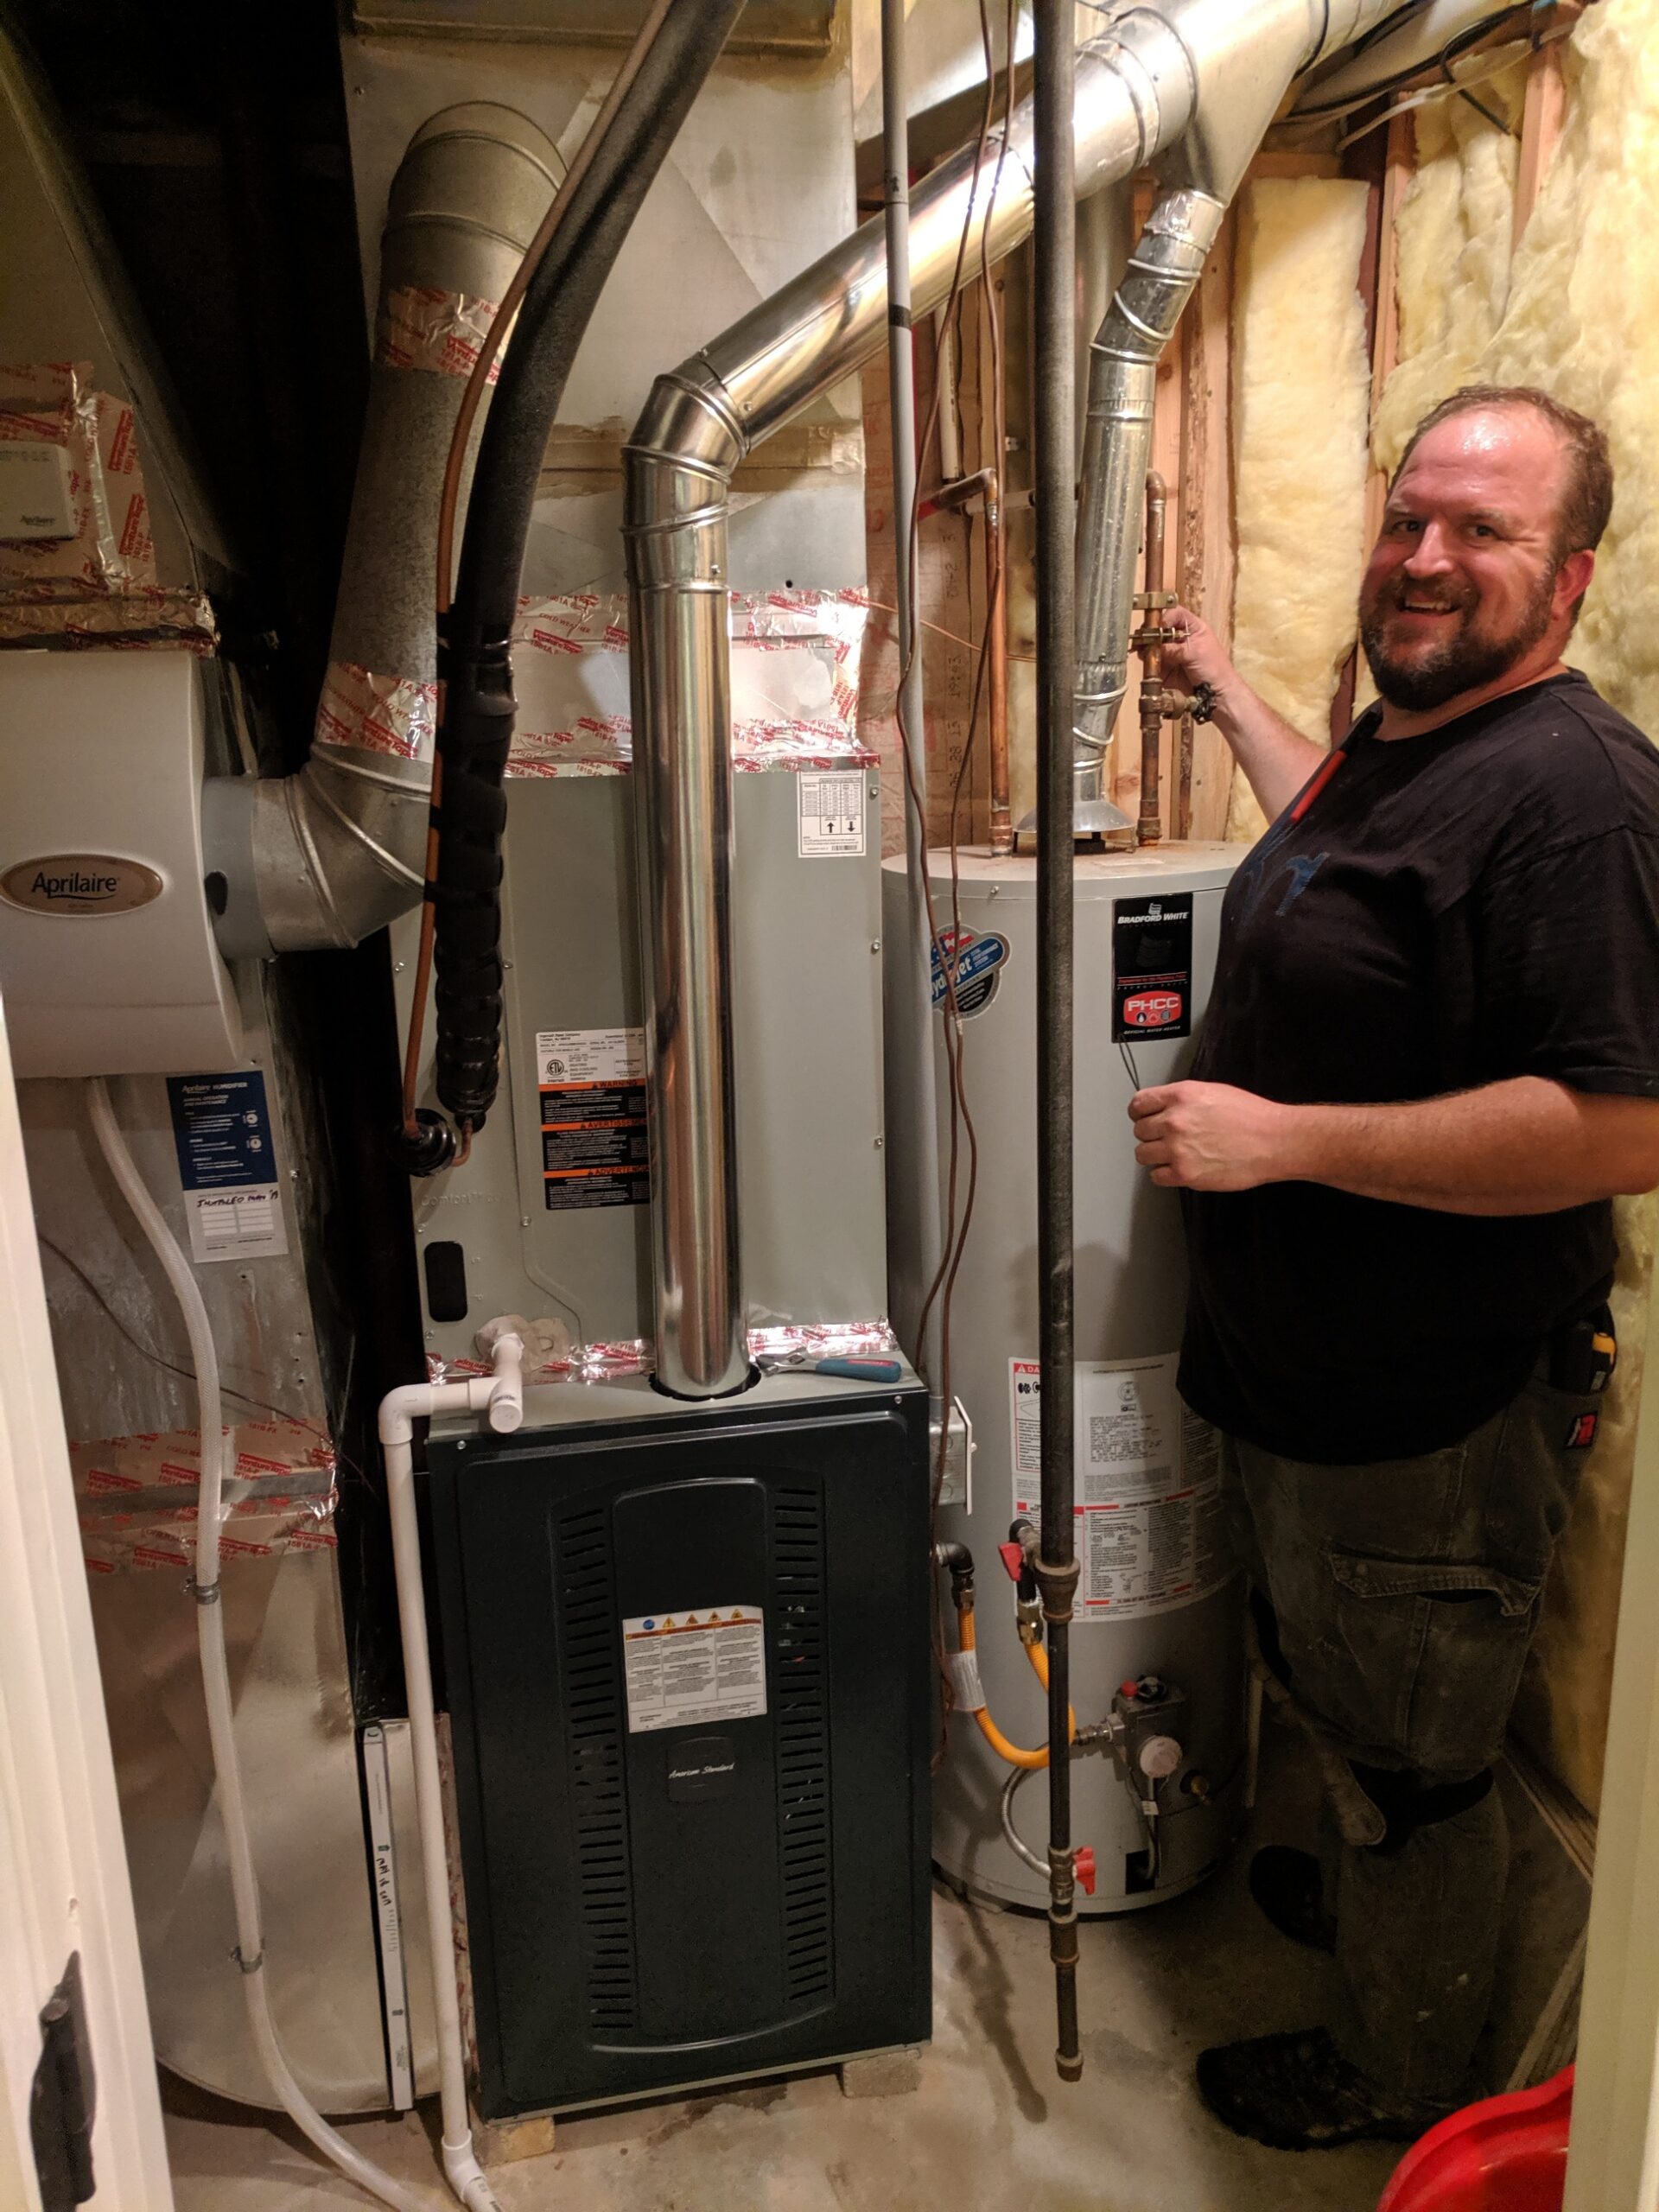 HVAC Products and Services